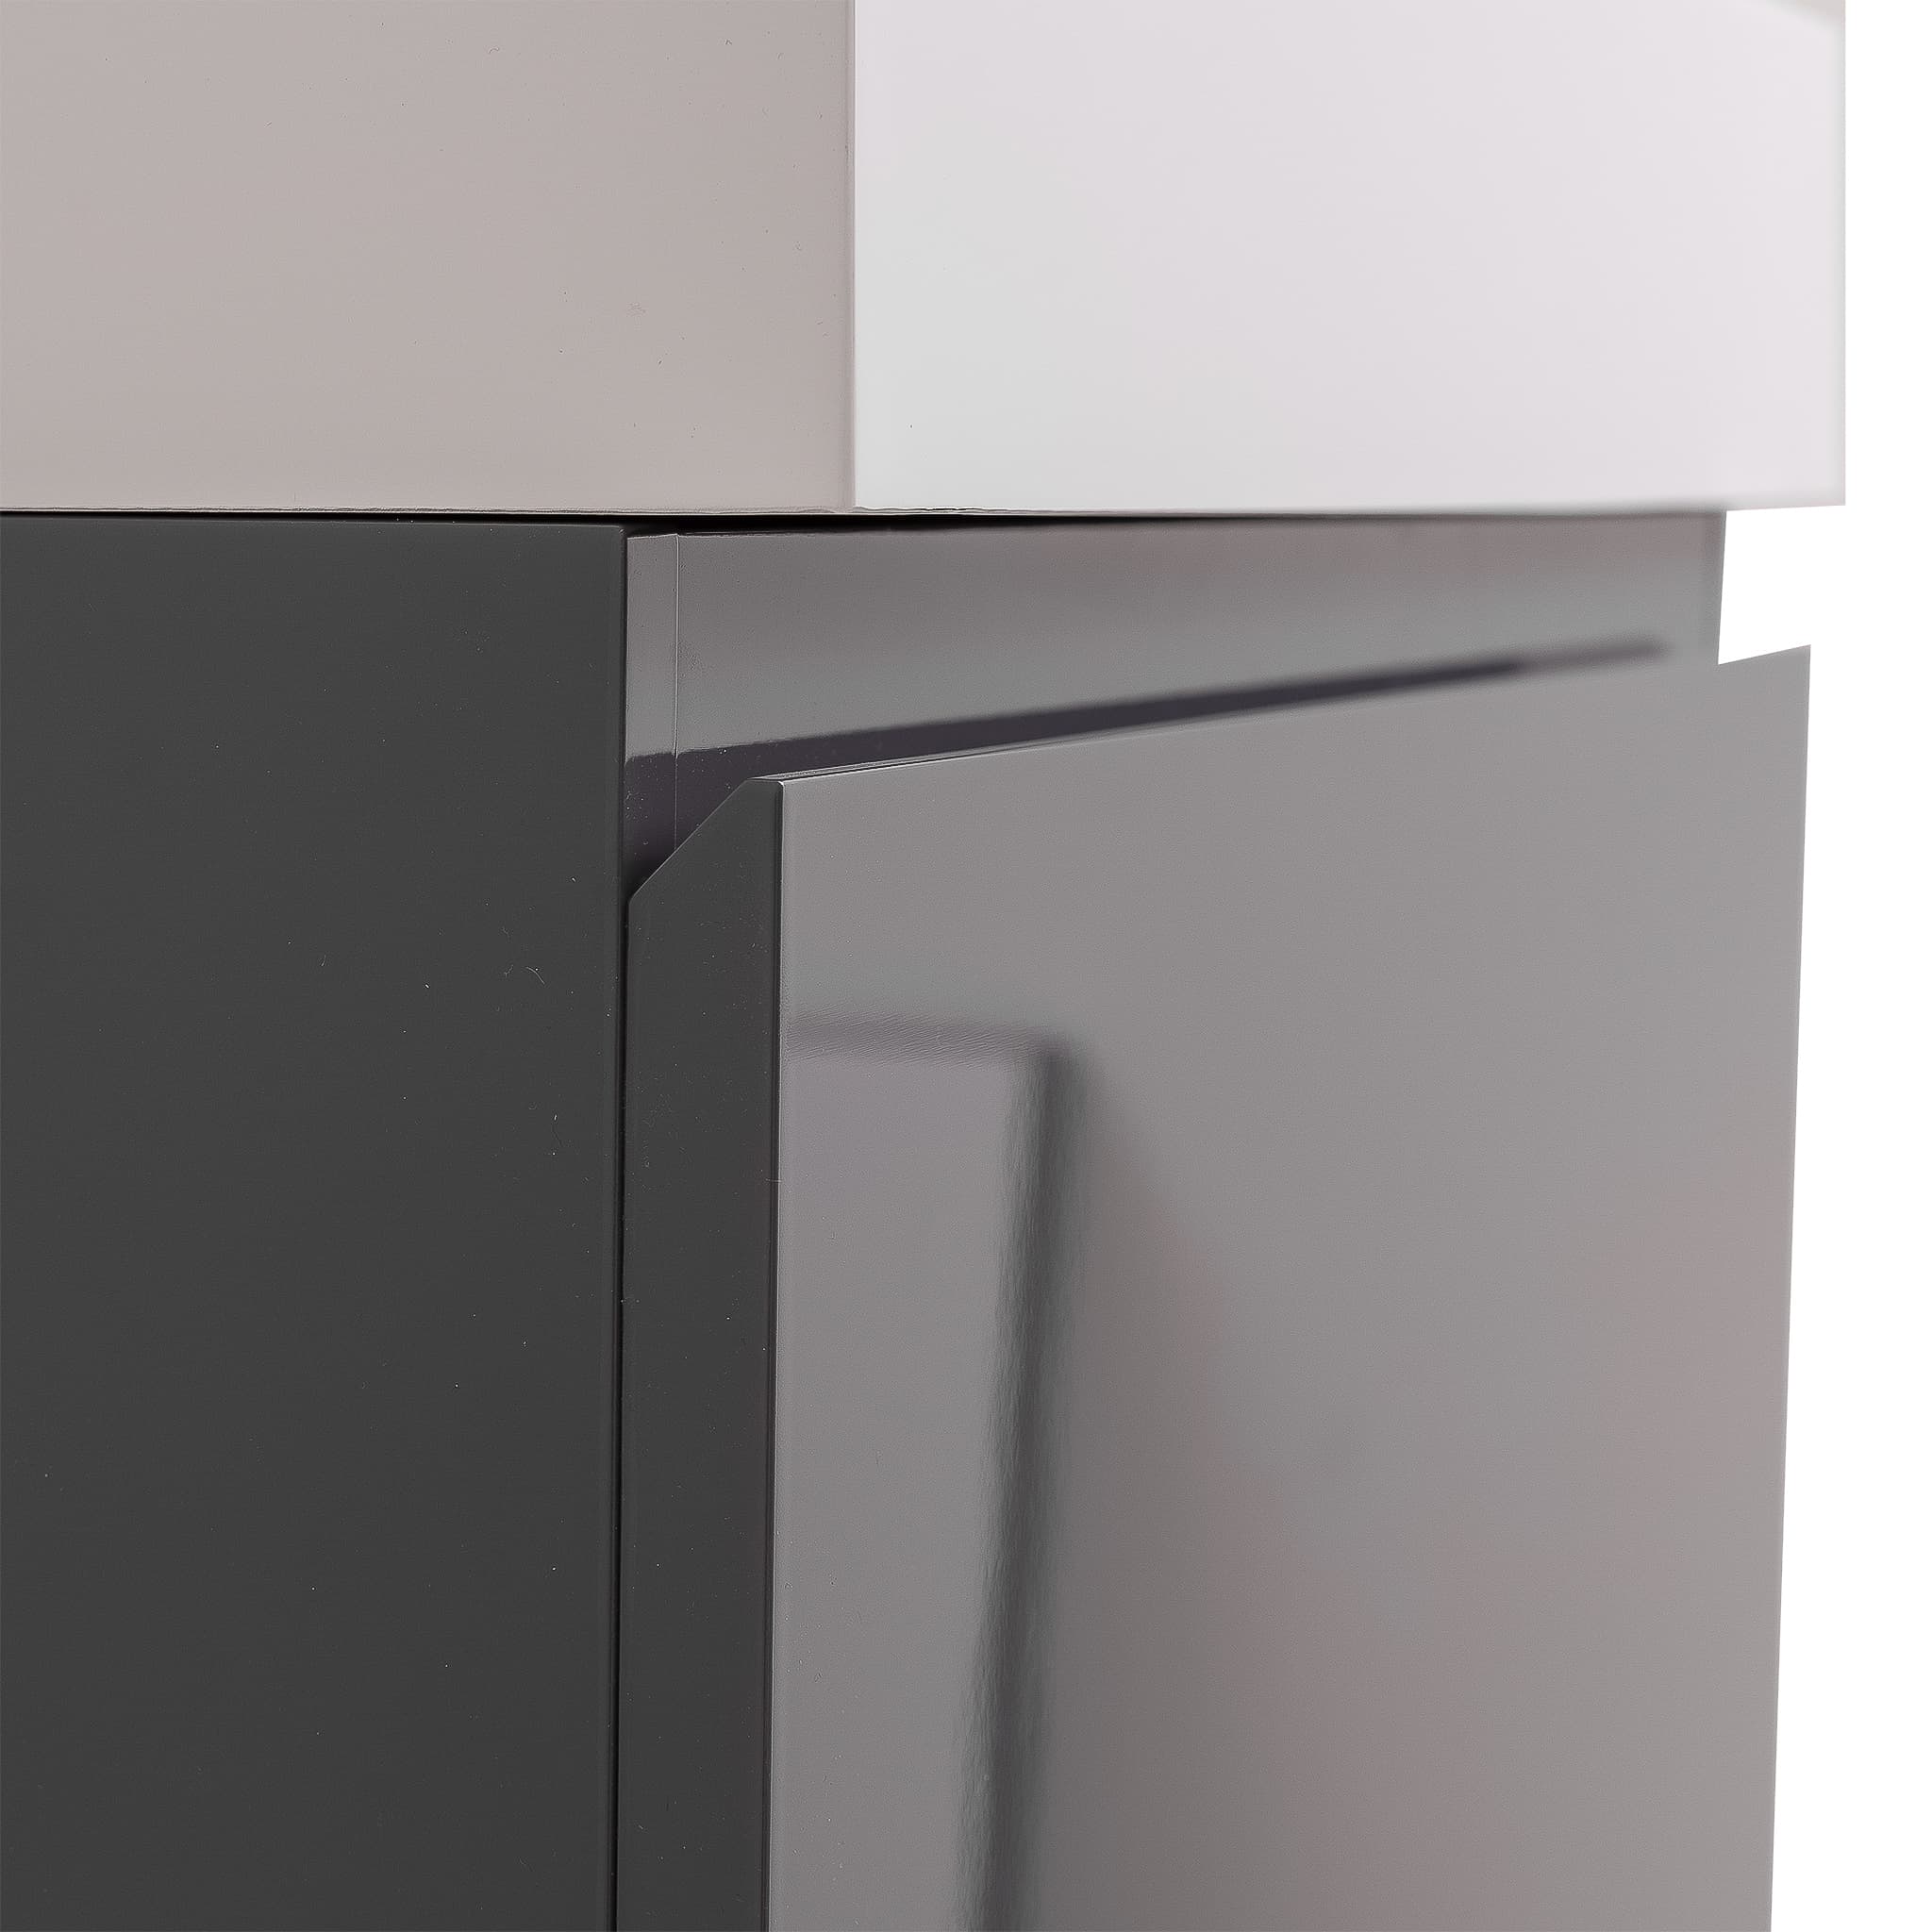 Venice 23.5 Anthracite High Gloss Cabinet, Infinity Cultured Marble Sink, Wall Mounted Modern Vanity Set